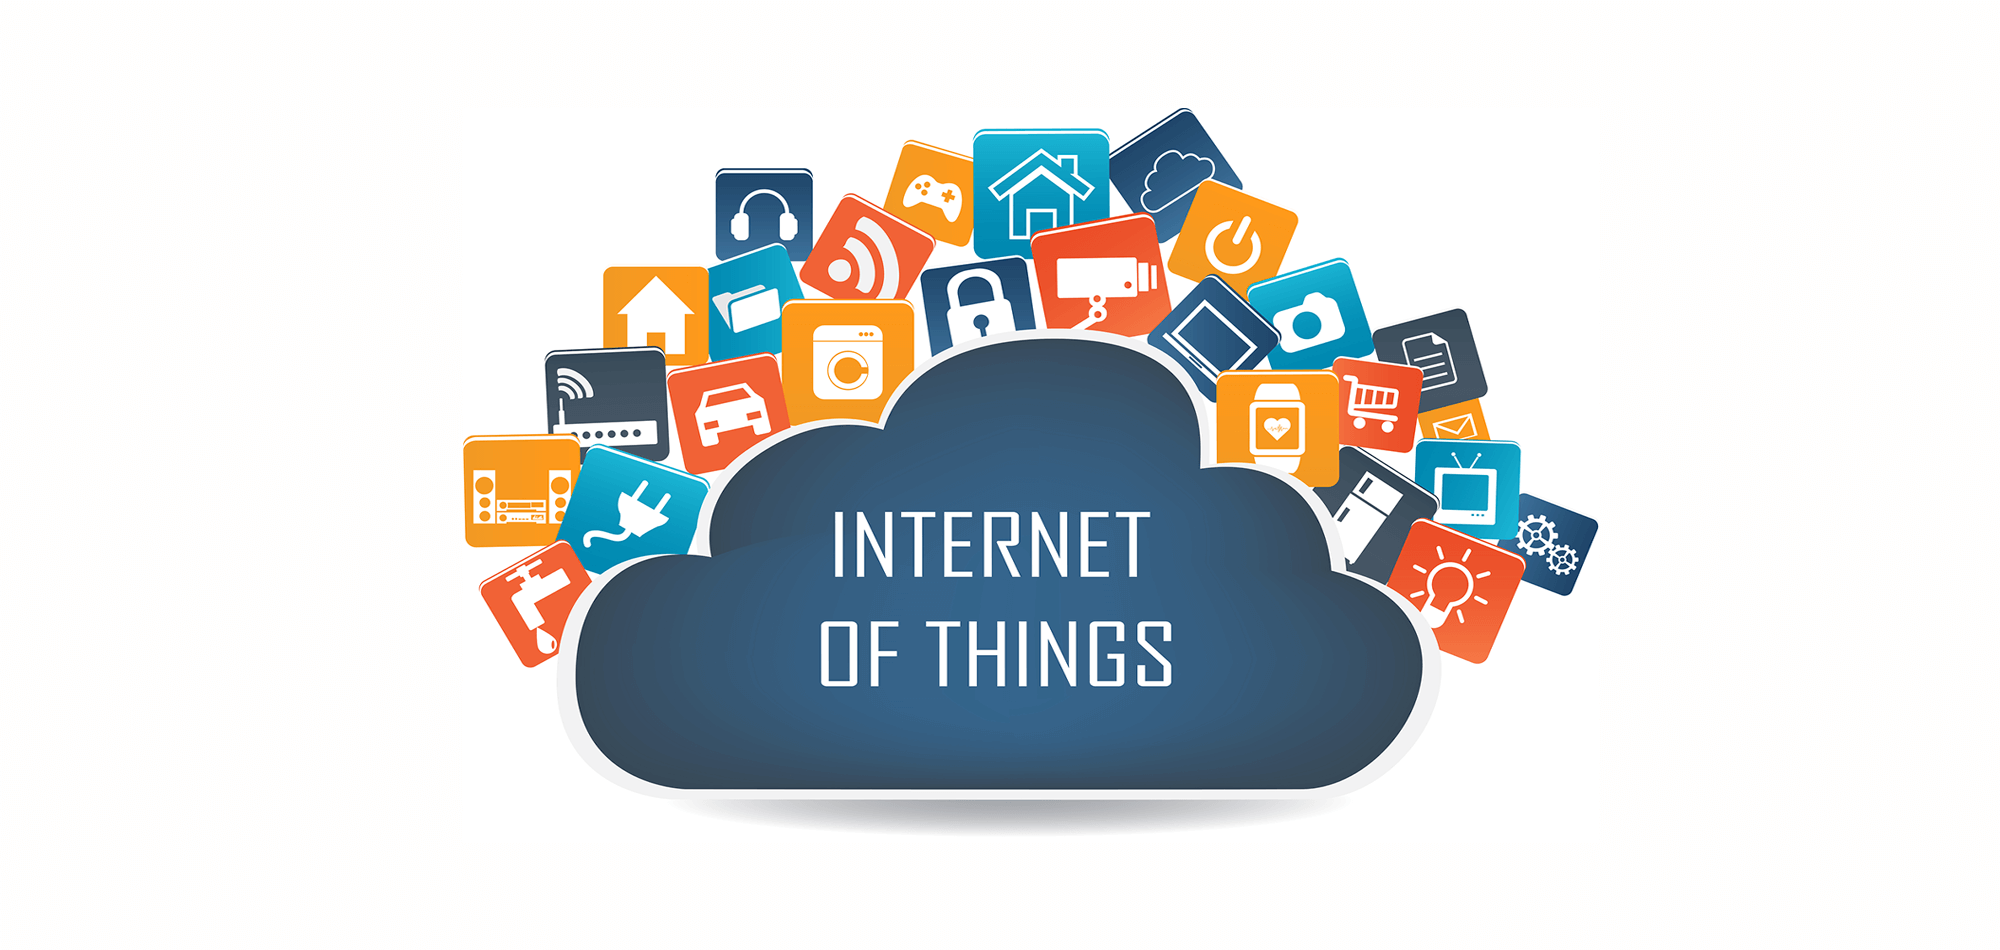 6 Tips for Preparing Your Wireless Network for the Internet of Things